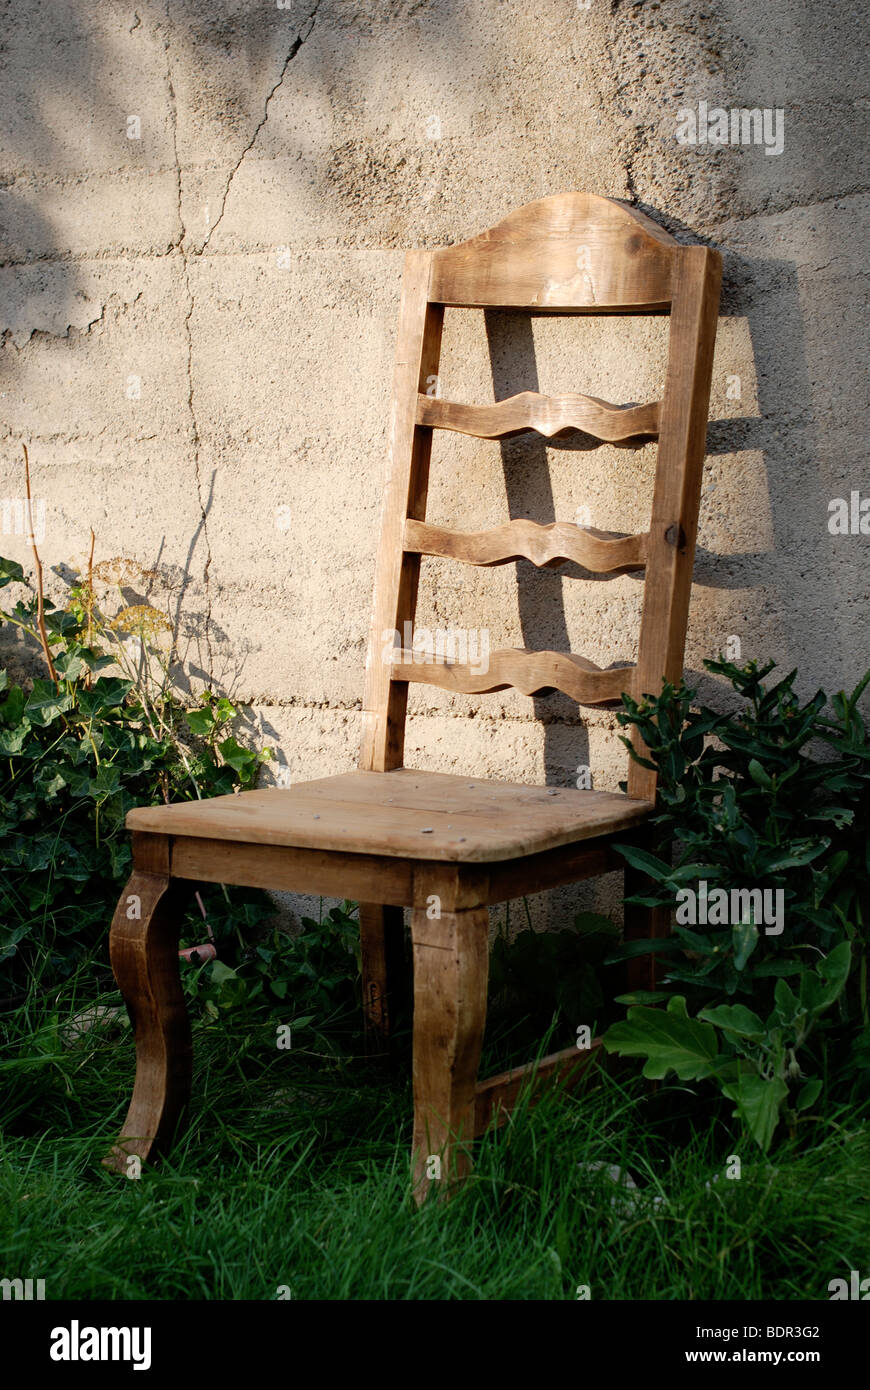 Wooden Chair against concrete wall in evening light. Stock Photo